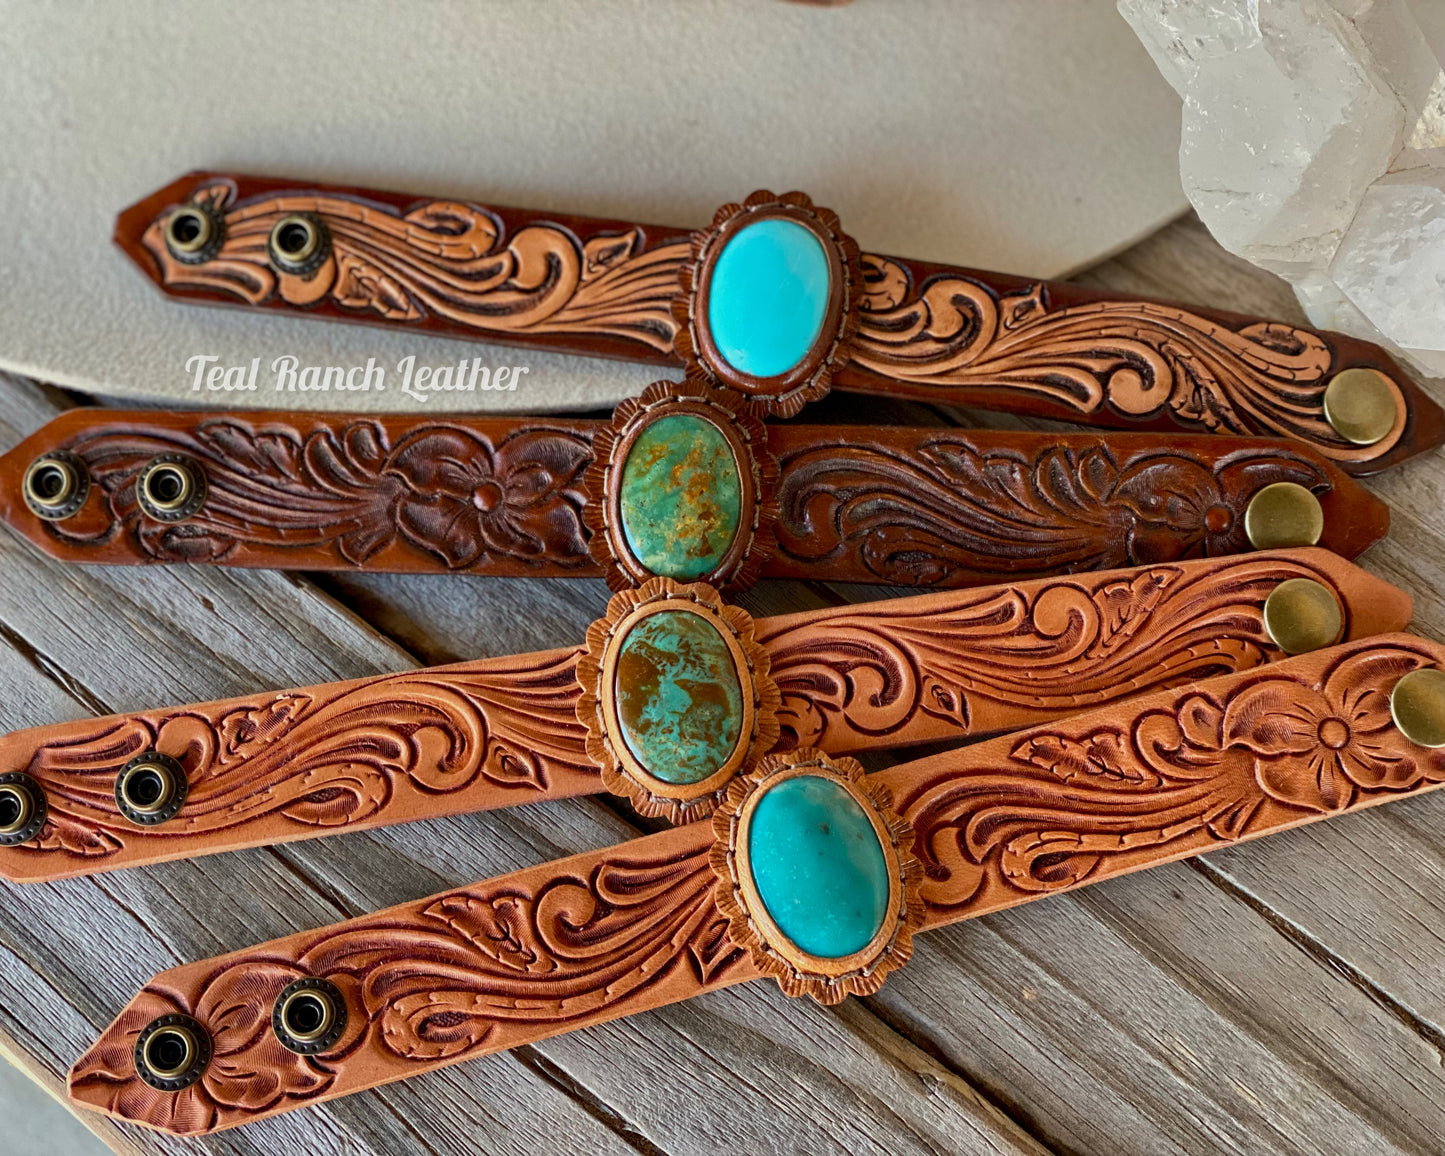 Tooled leather and turquoise cuffs